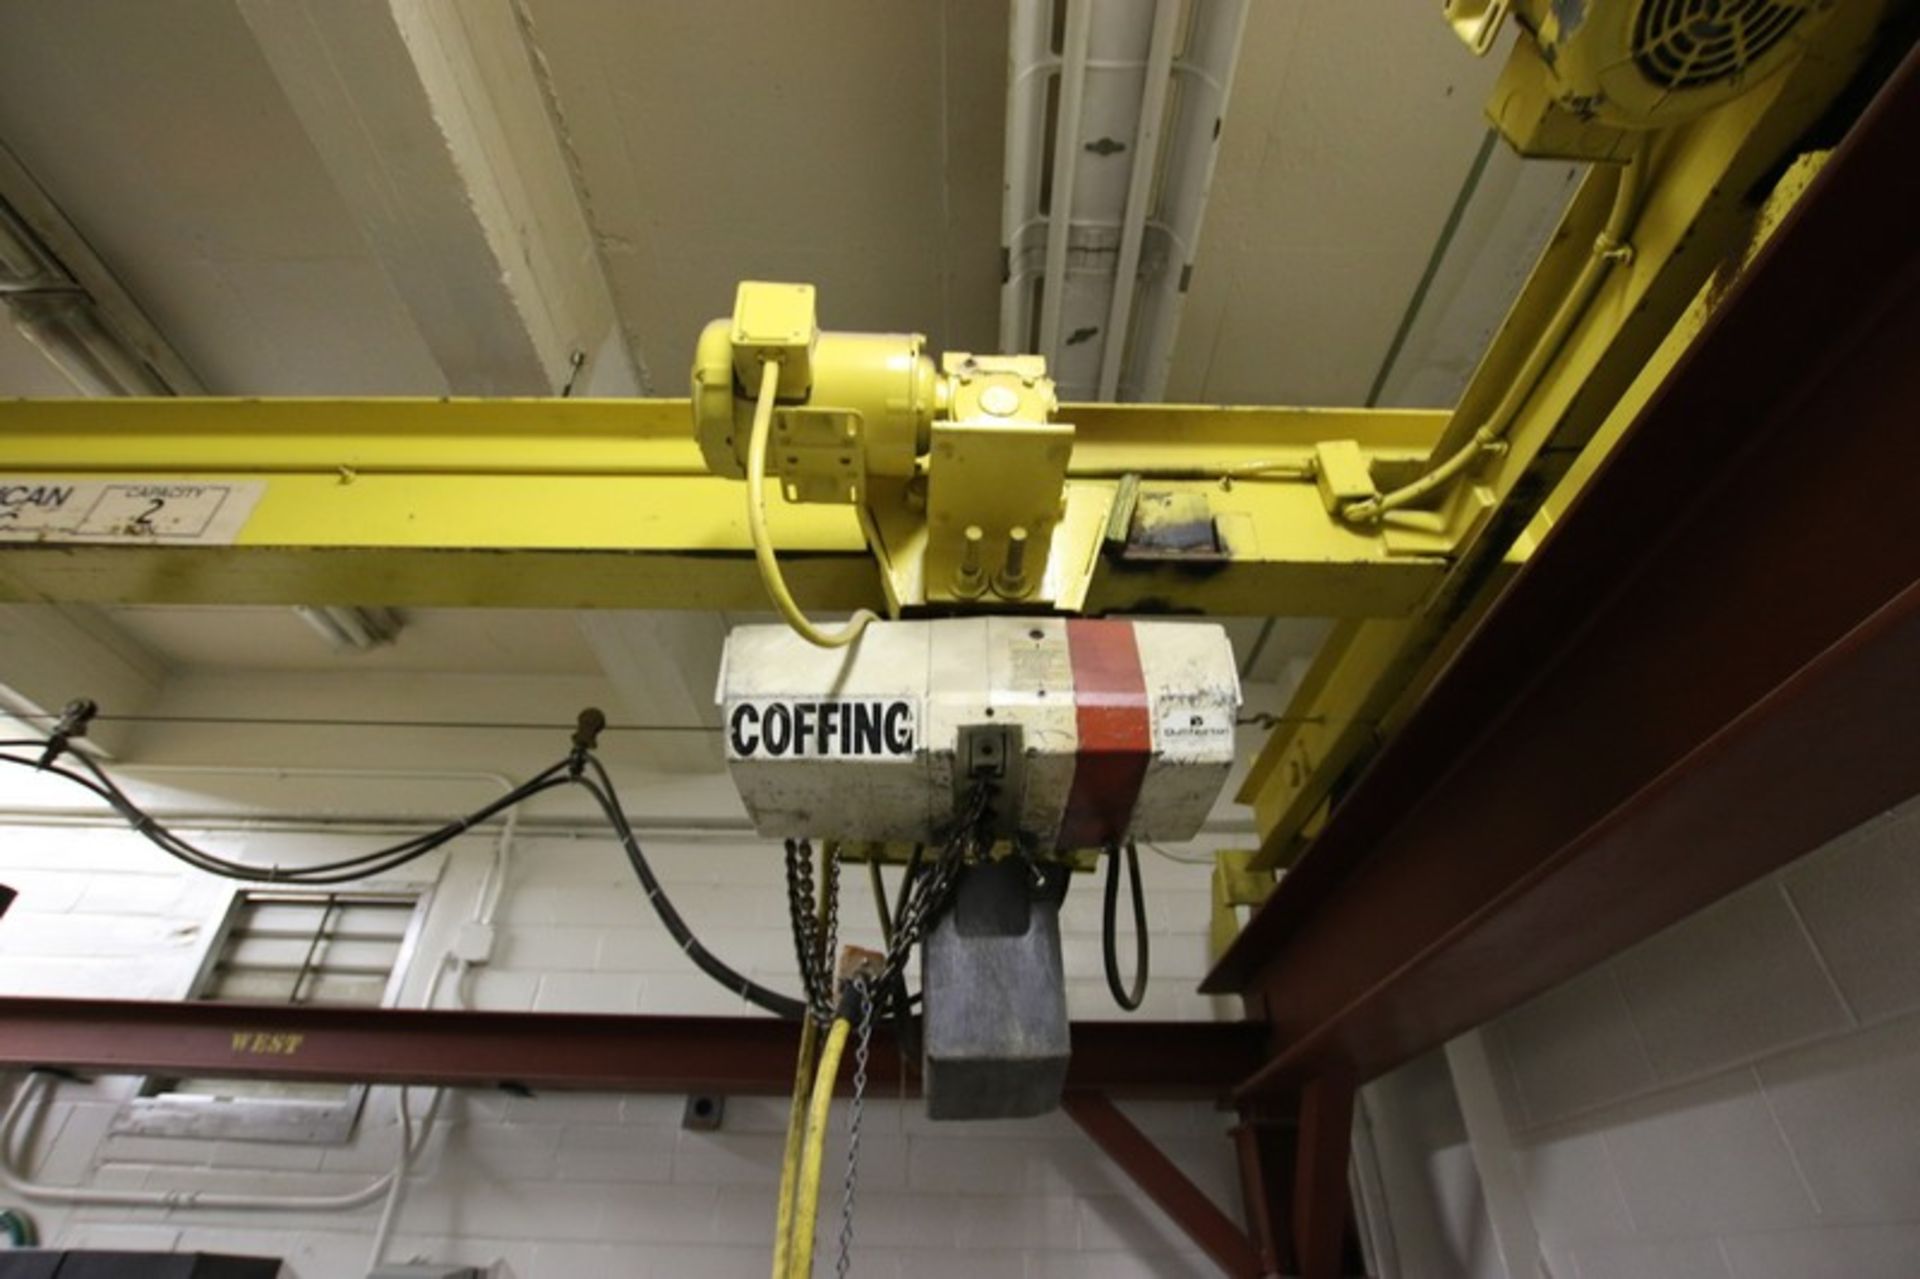 North American Industries Inc. 2-Ton Capacity Crane with Coffing Unit - Image 2 of 3